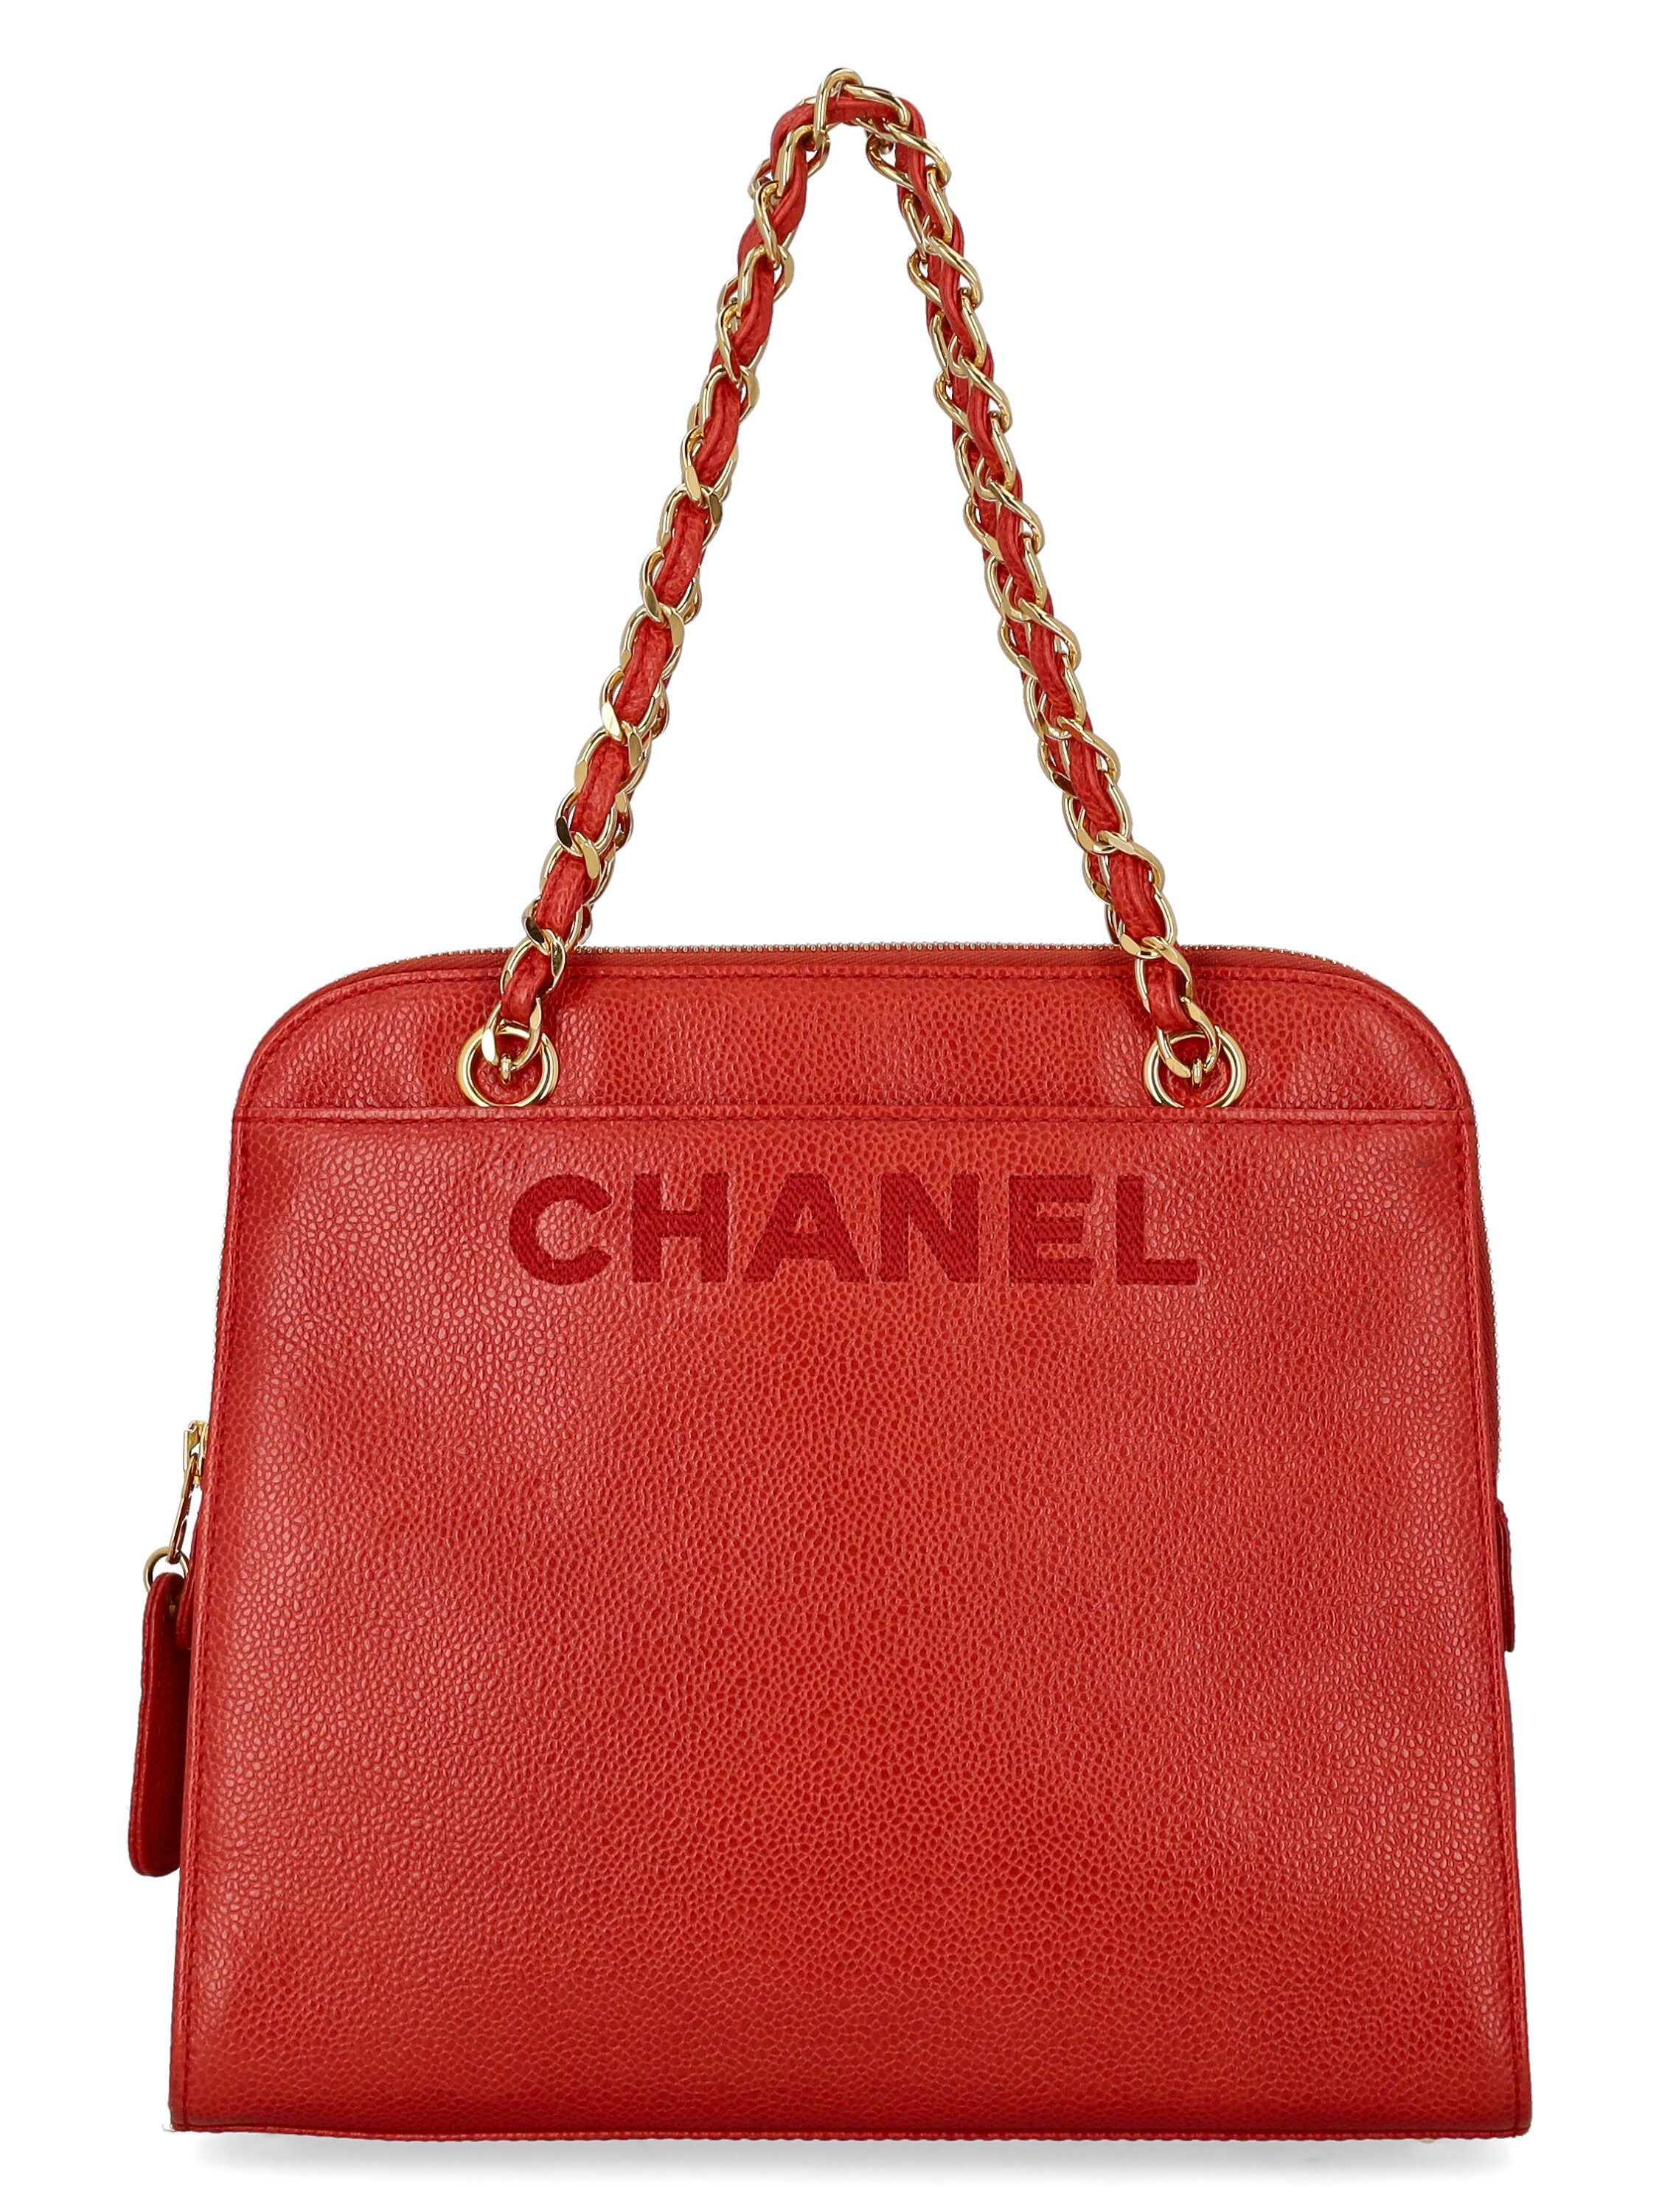 Pre-owned Chanel Women's Handbags -  - In Red Leather